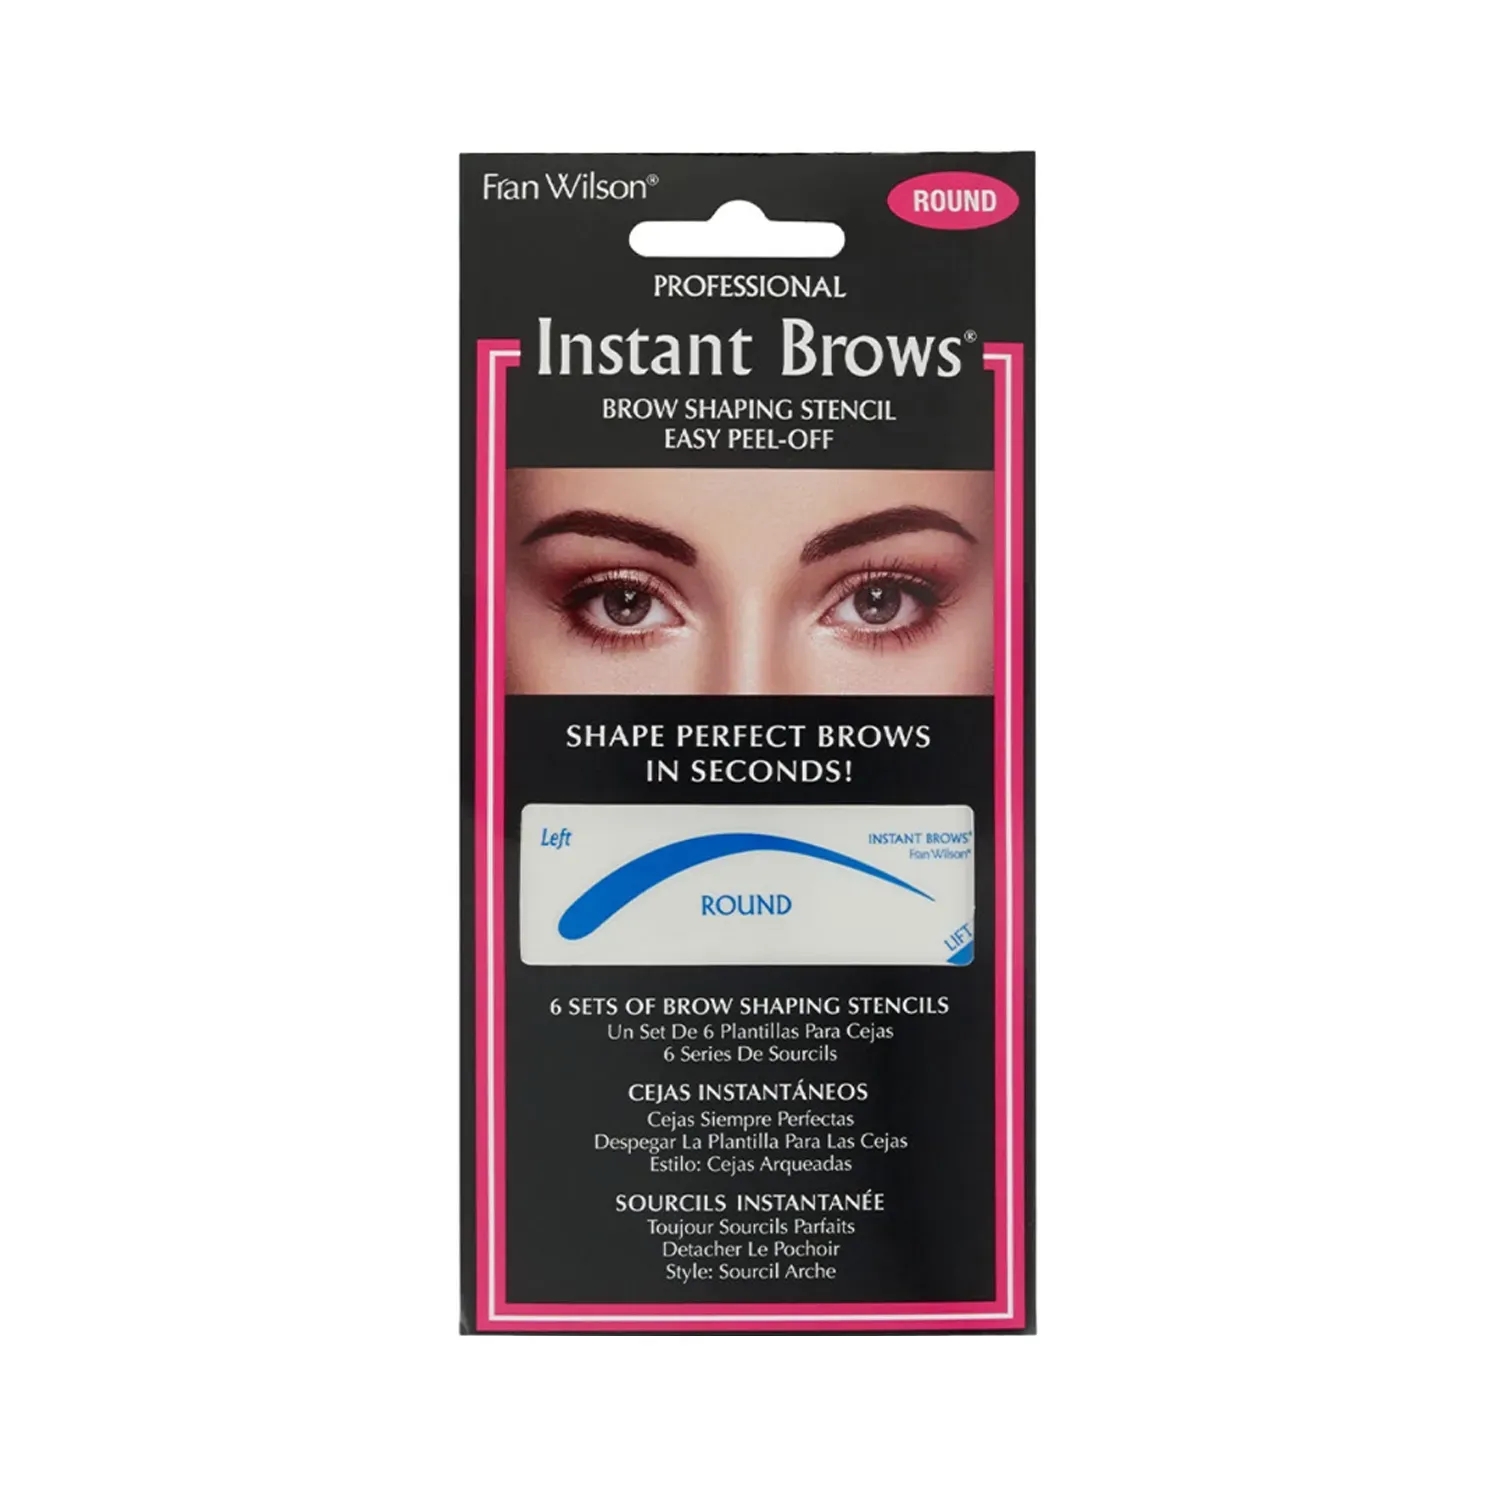 Fran Wilson Moodmatcher | Fran Wilson Moodmatcher Instant Brows Shaping Stencil - Round (Set of 6)